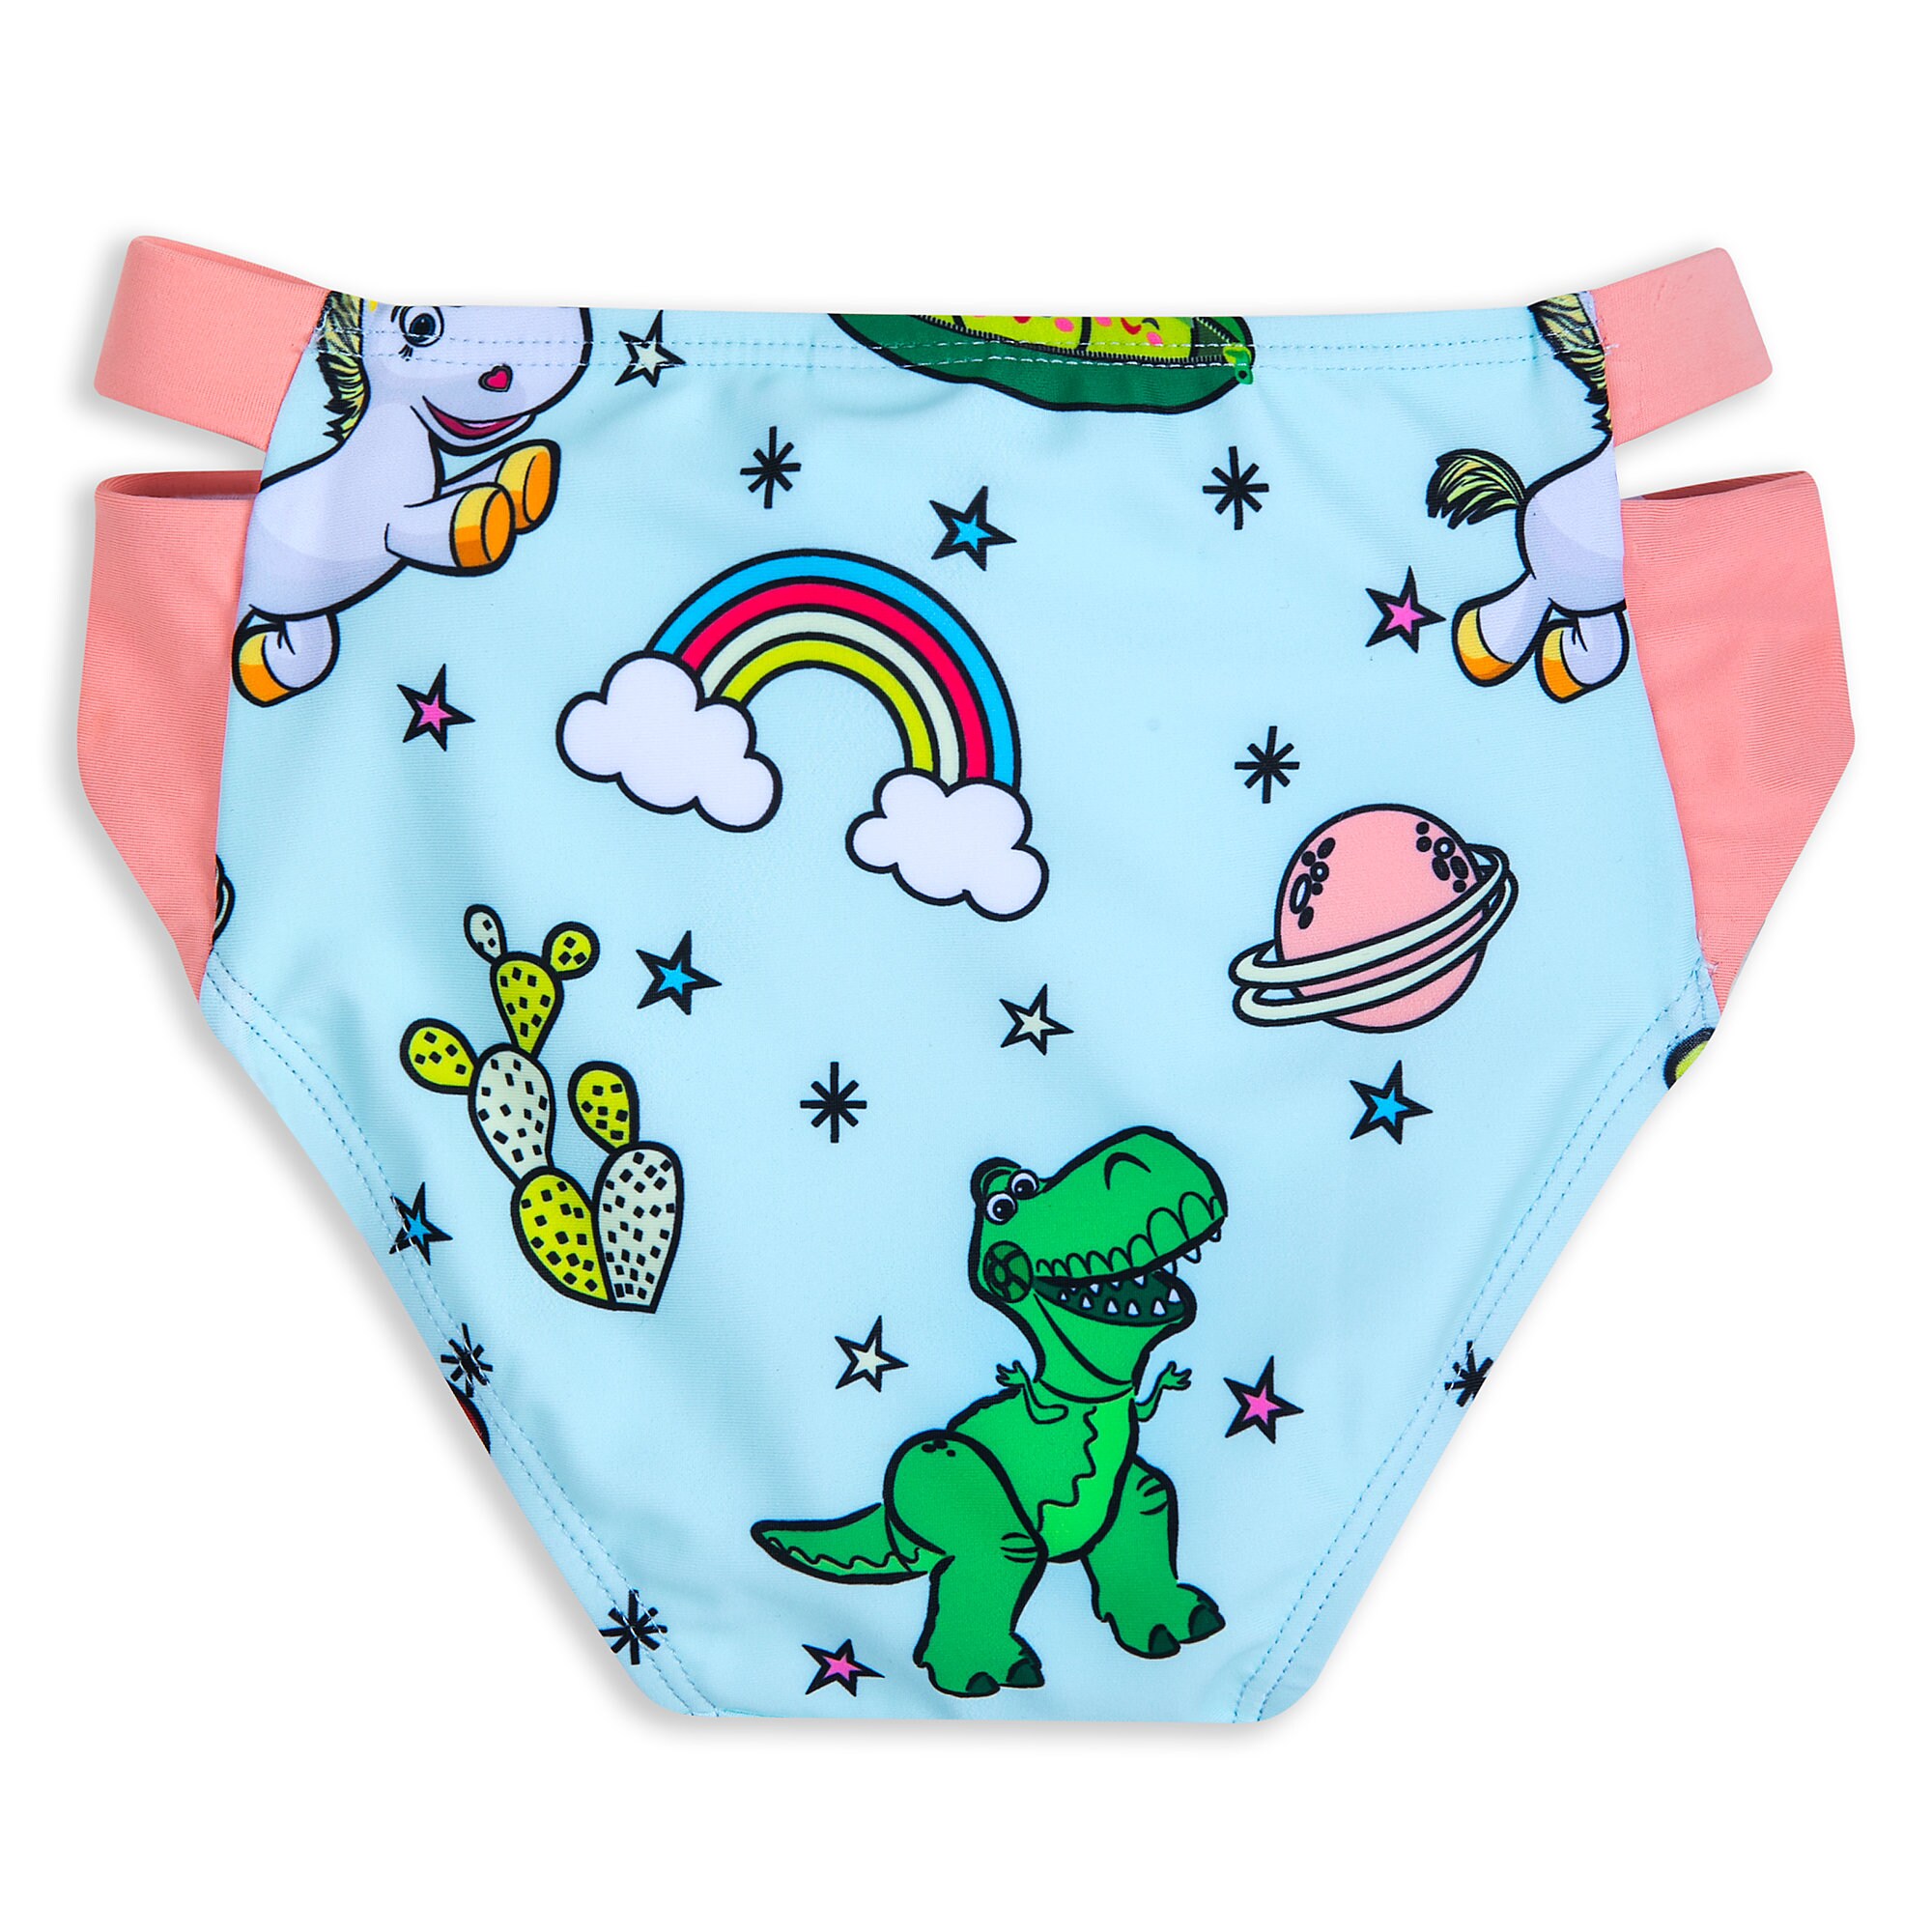 Toy Story Two-Piece Swimsuit for Girls